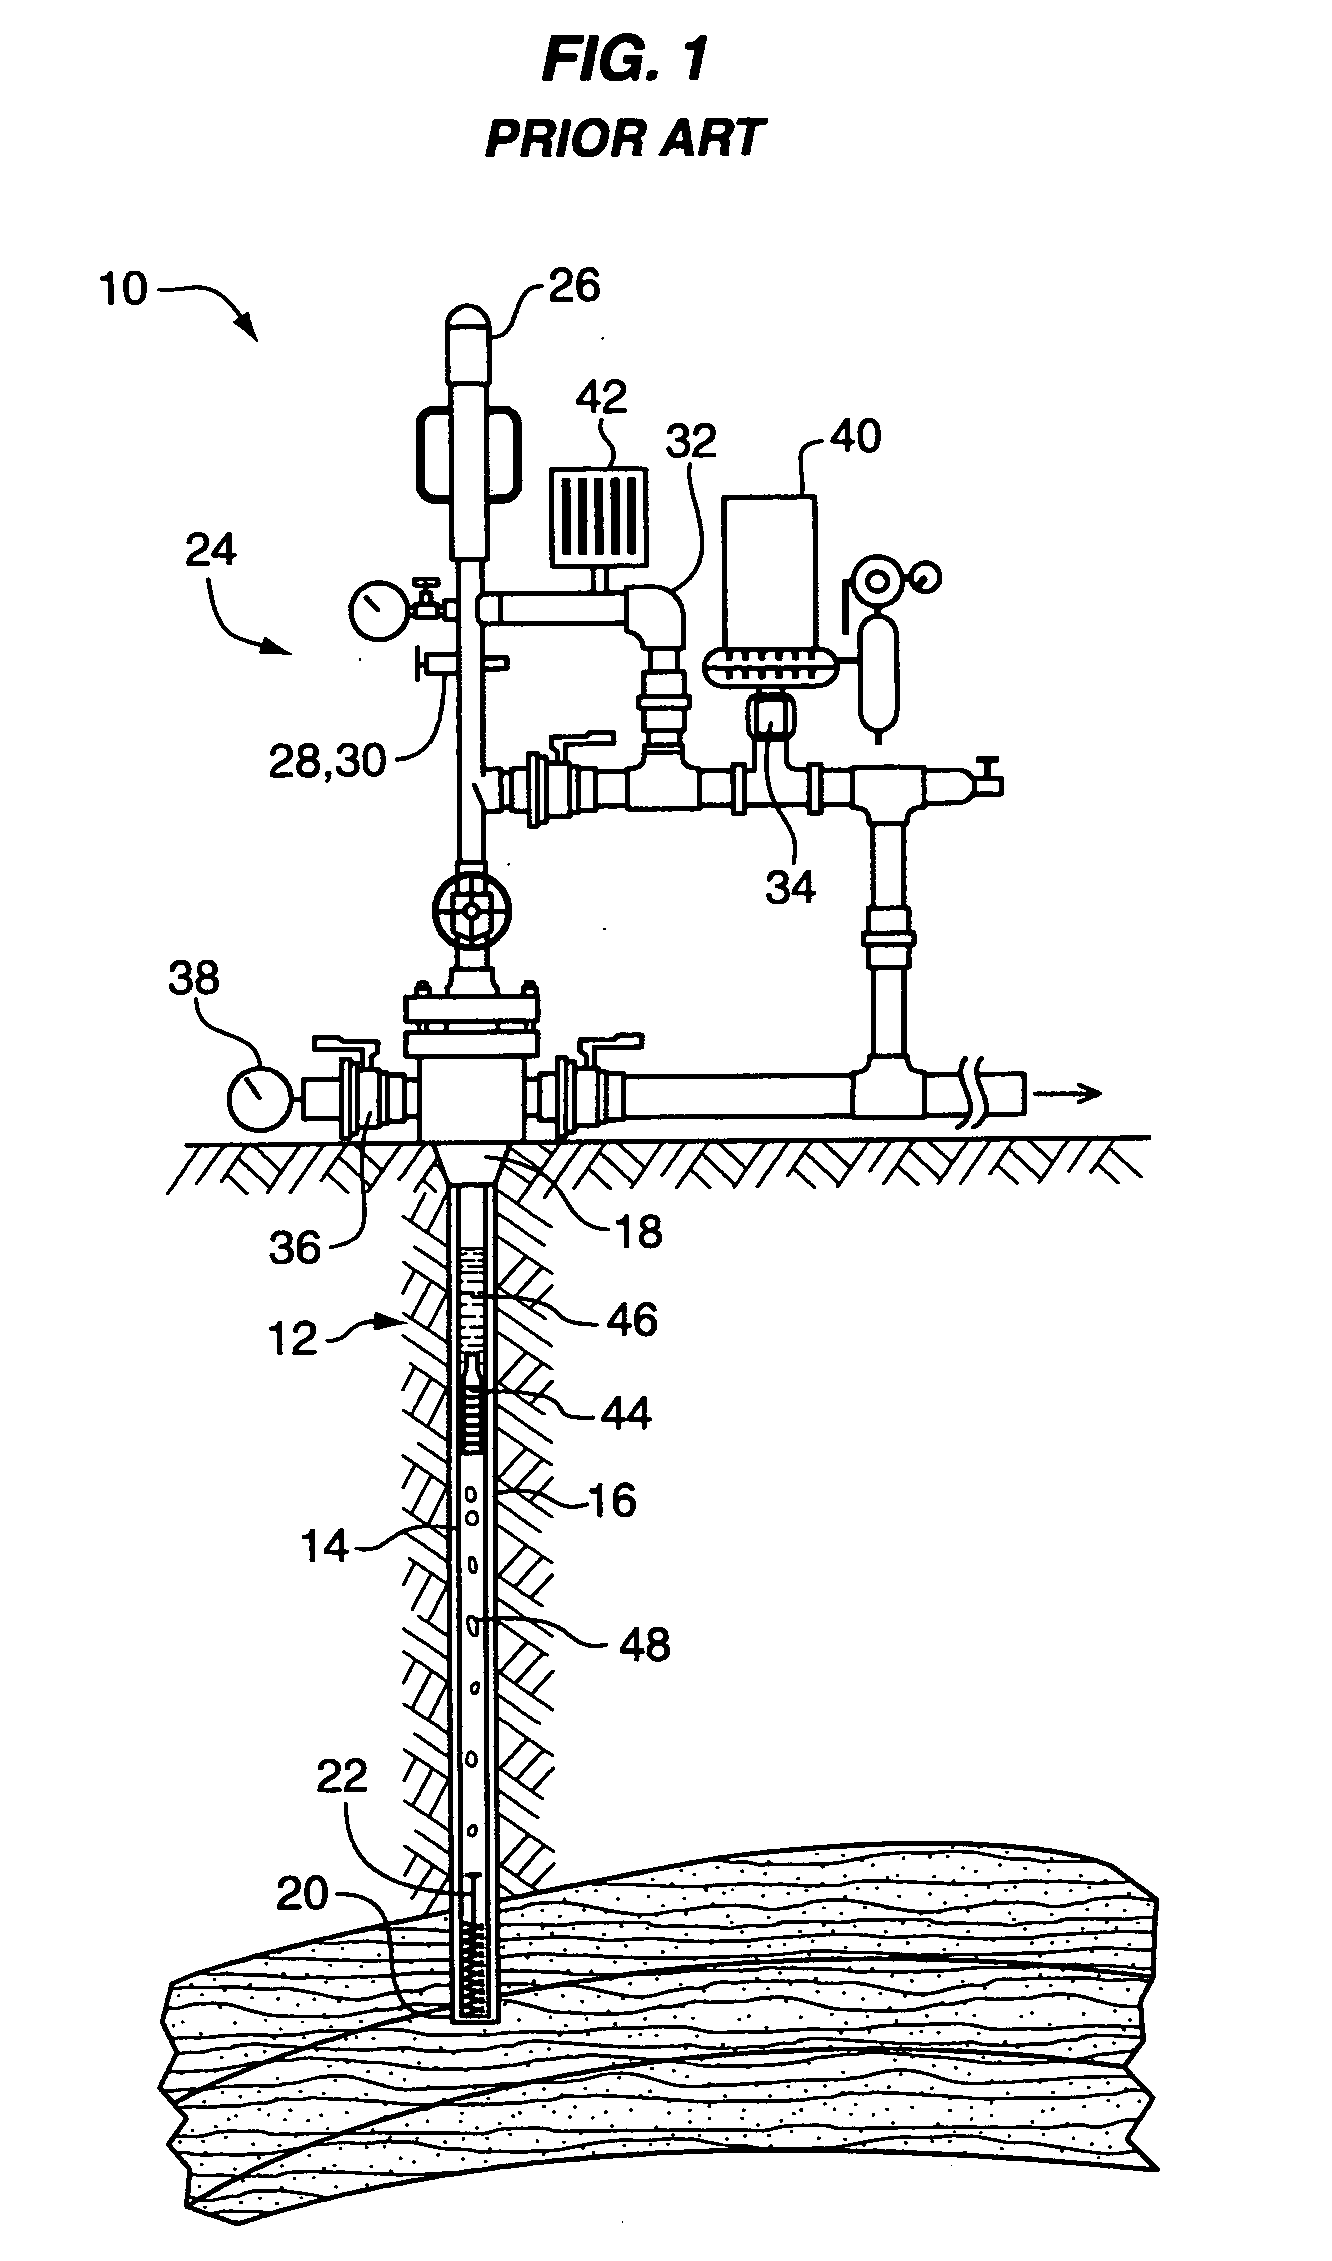 Instrumented plunger for an oil or gas well